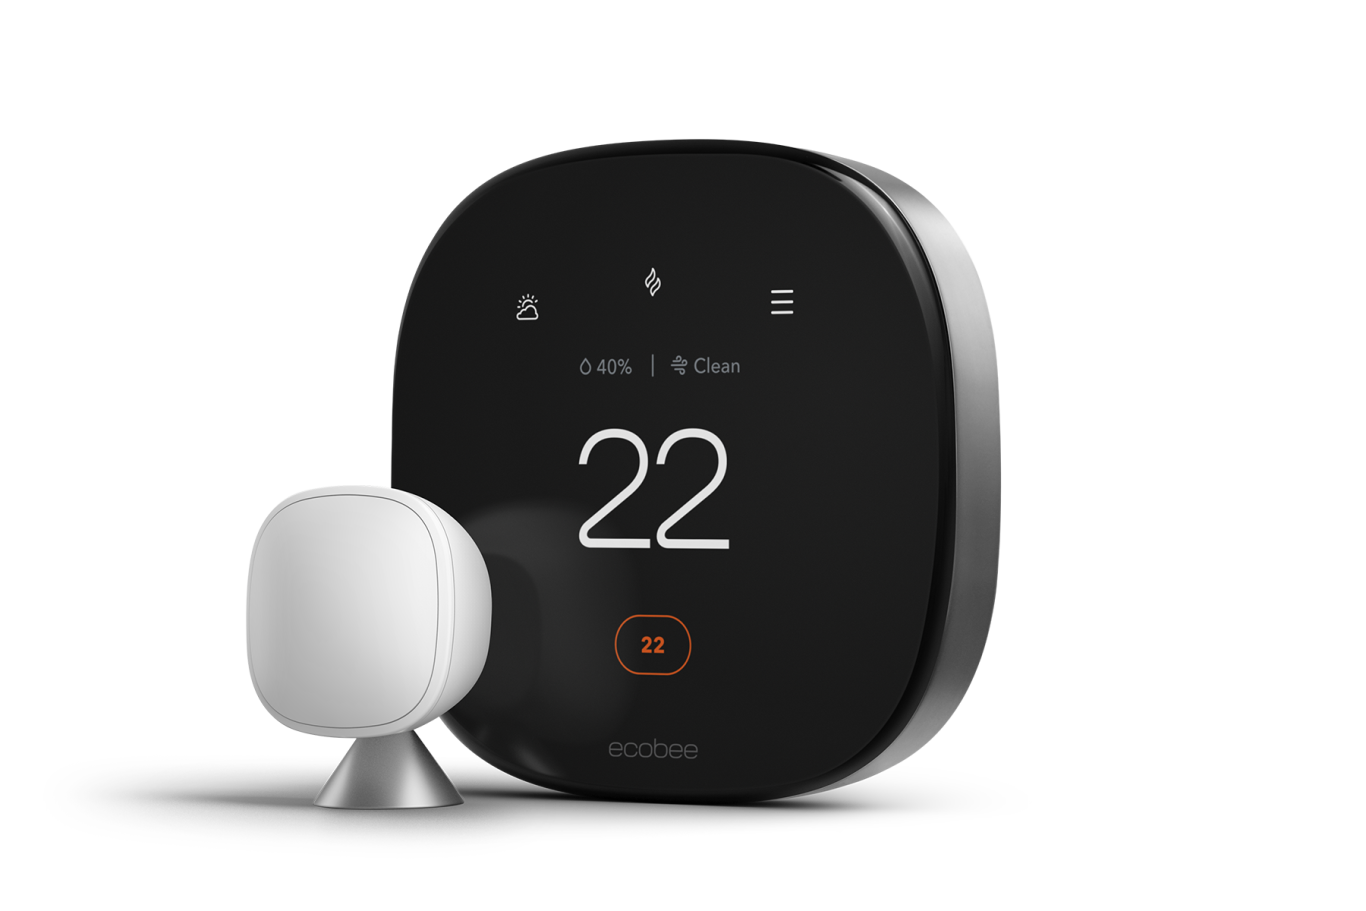 Smart Thermostat Review